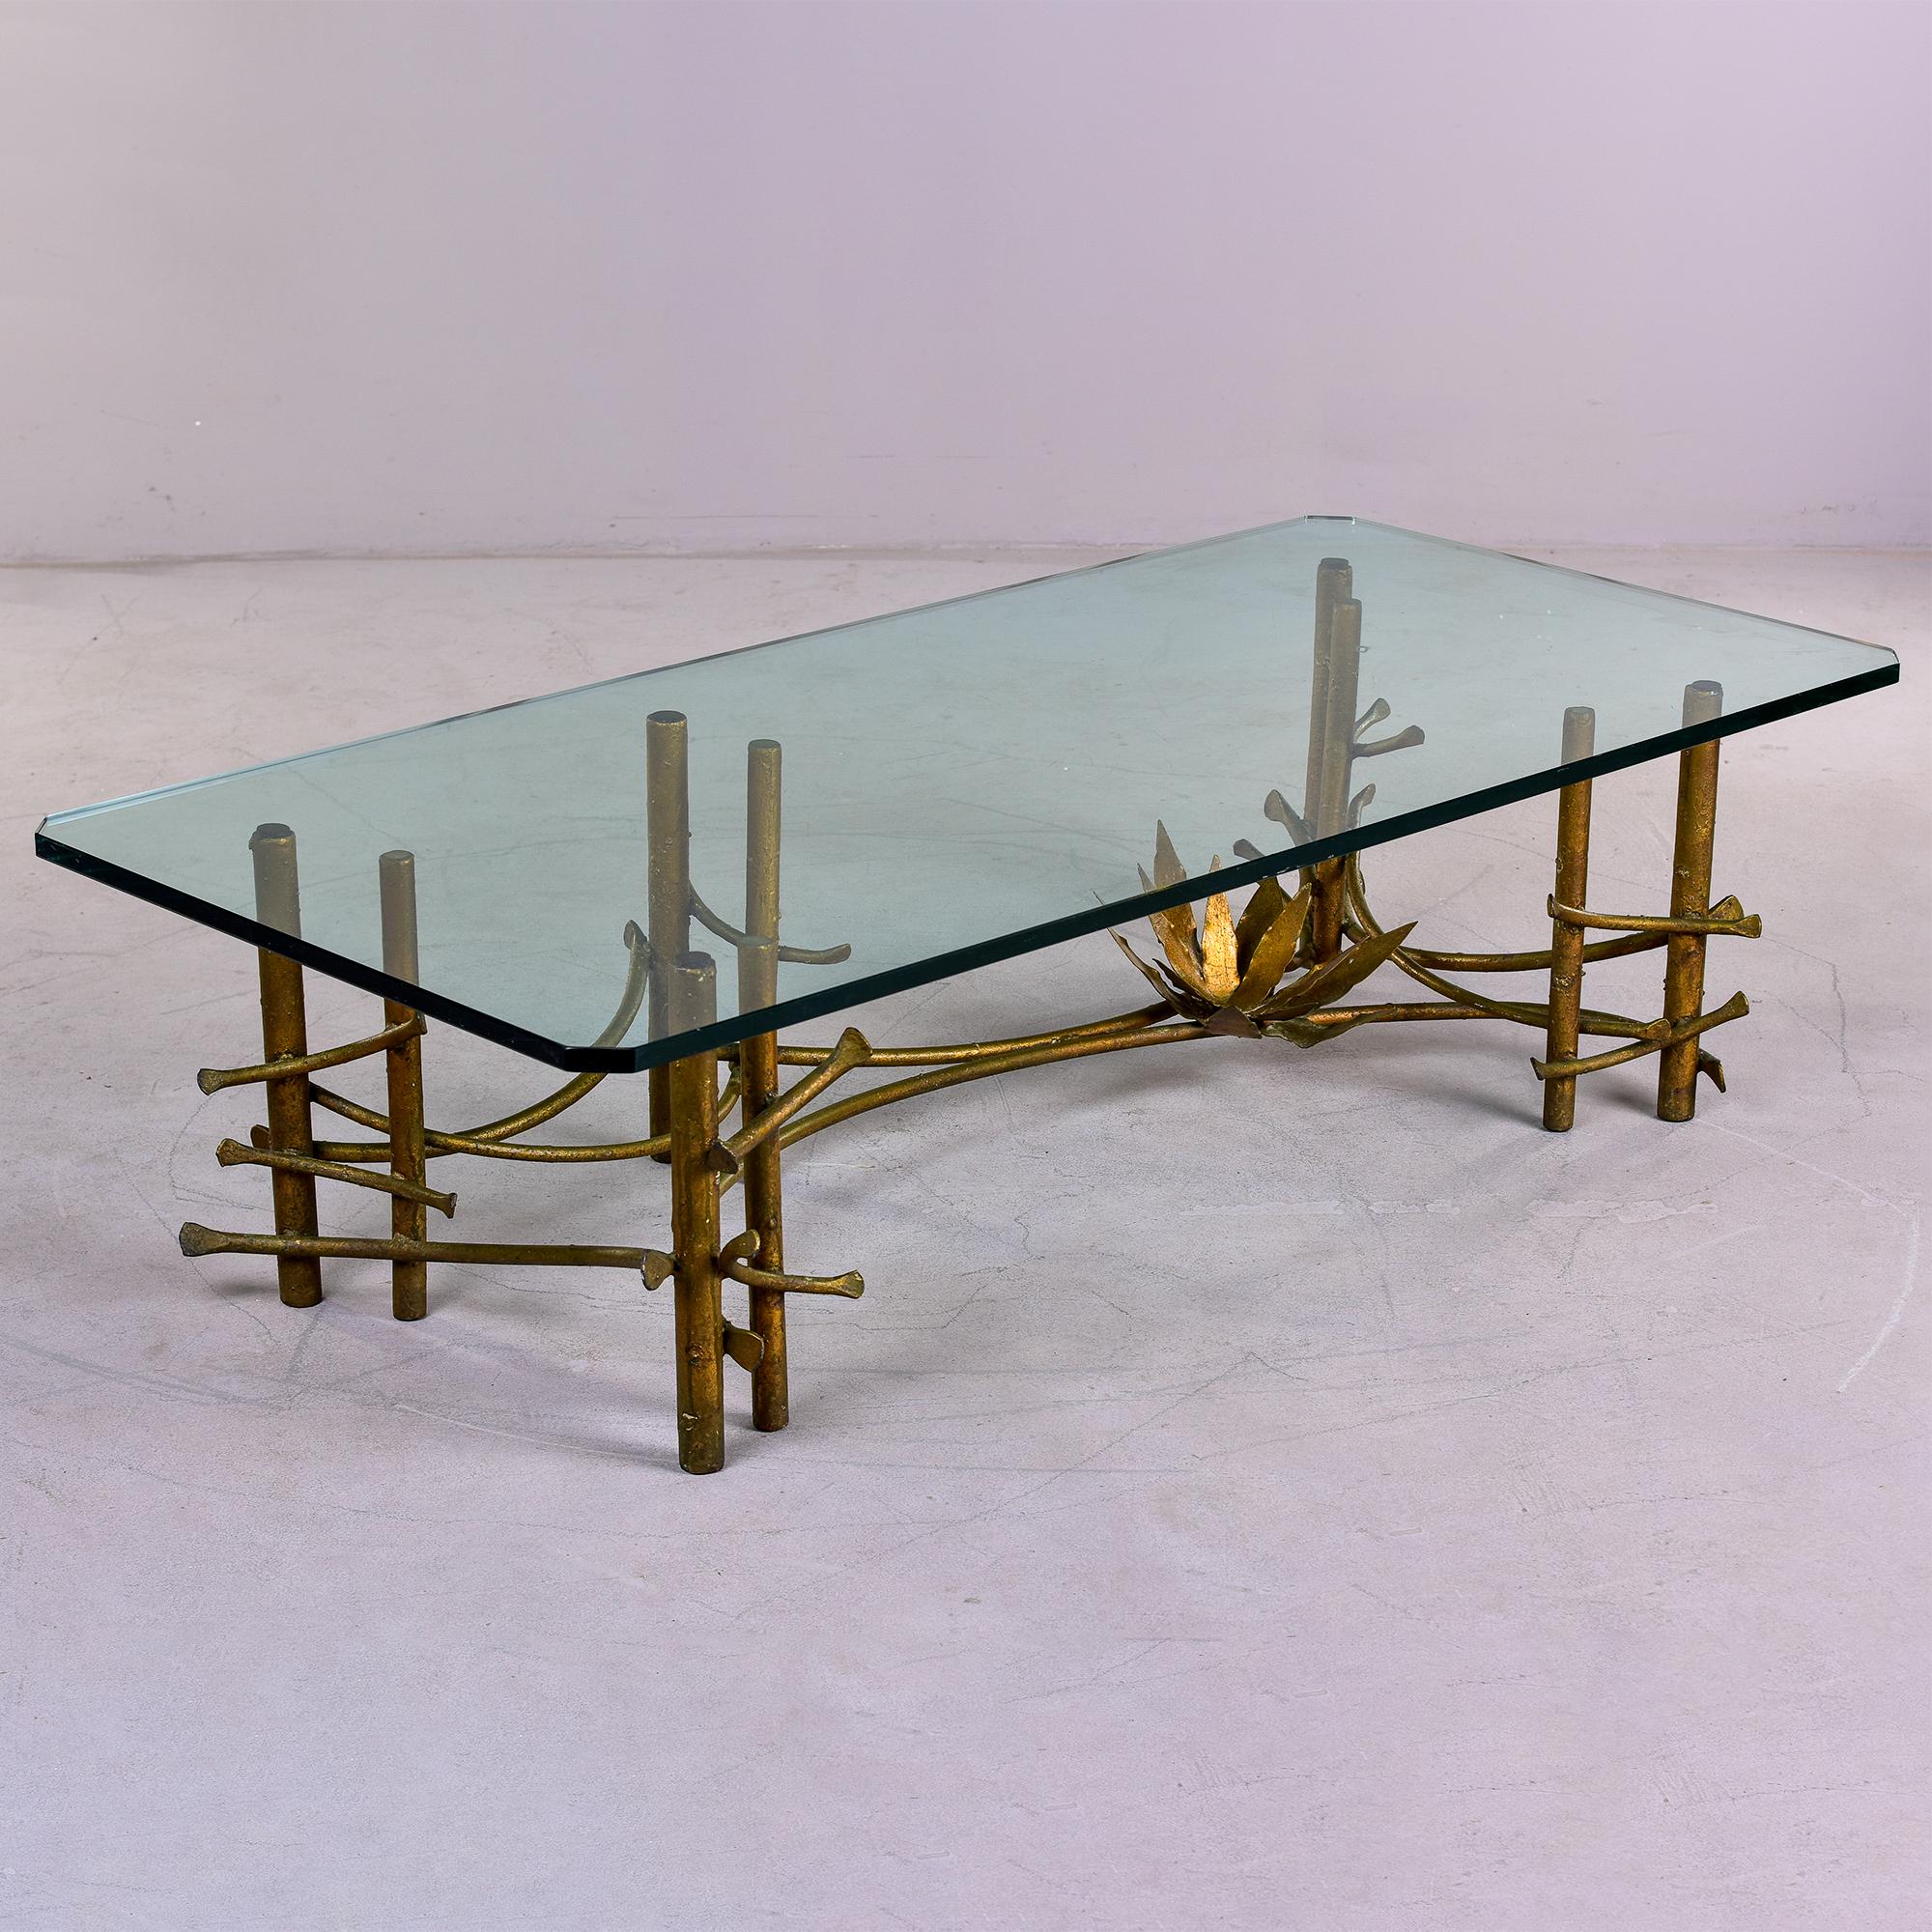 Circa 1970s large glass and gilt bronze coffee table designed by Silas Seandel. Asian-influenced with lotus blossom - classic Hollywood Regency style with honest wear and patina. Original thick, heavy glass top has a small scratched area - see